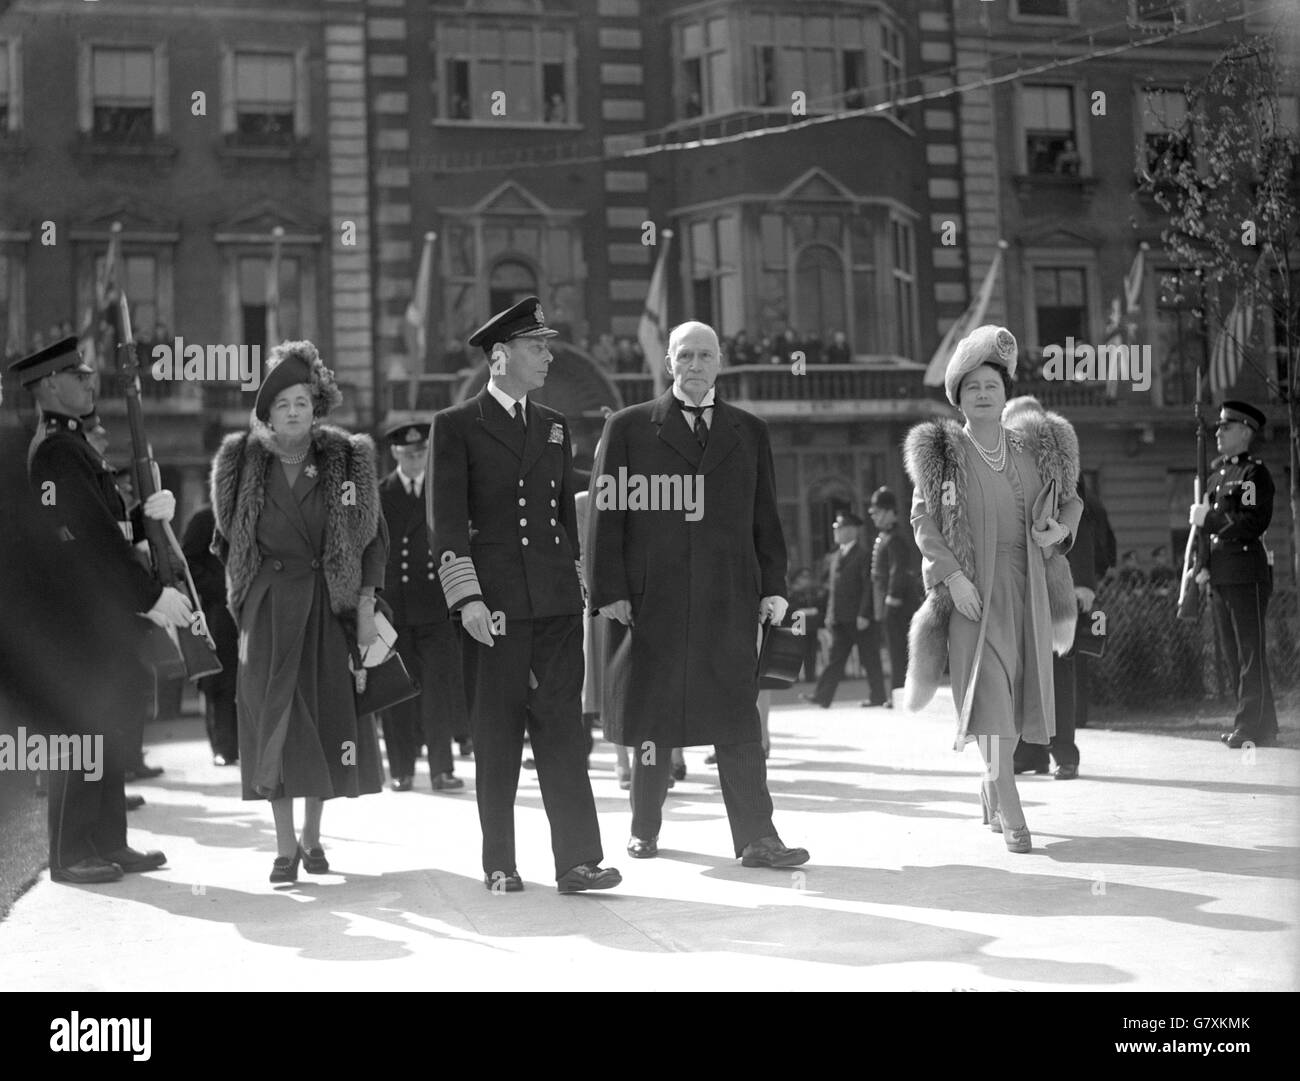 The King and Queen arrive at Grosvenor Square for the unveiling ceremony of a statue of United States President F. D. Roosevelt. Stock Photo